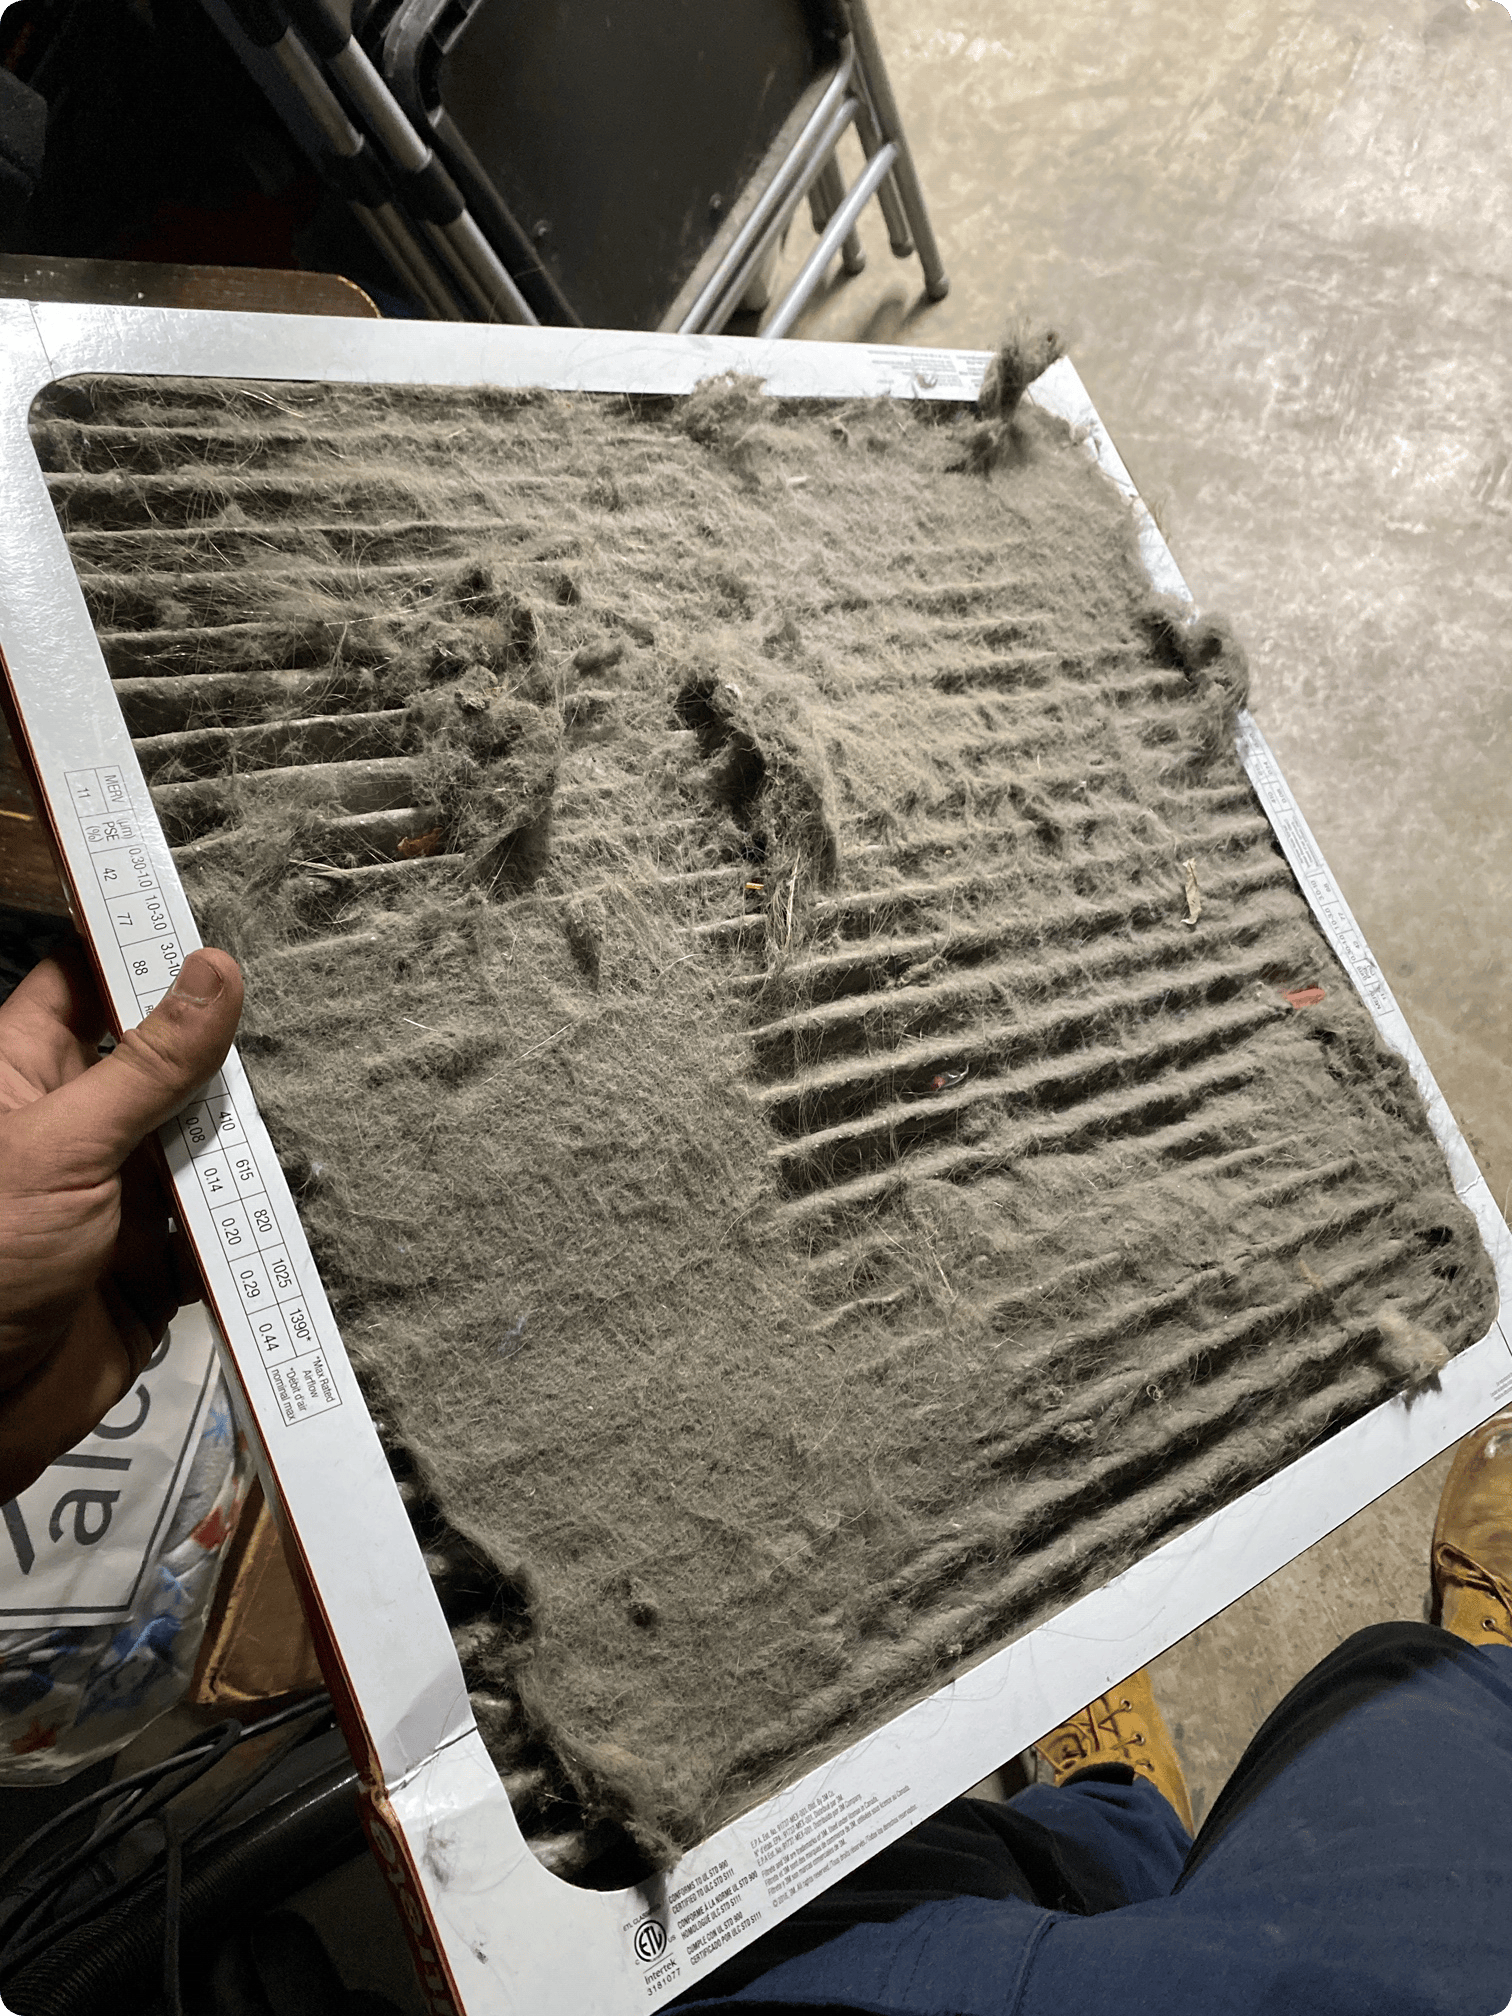 Air Filters Being Clogged Can Be A Big Problem For Your System